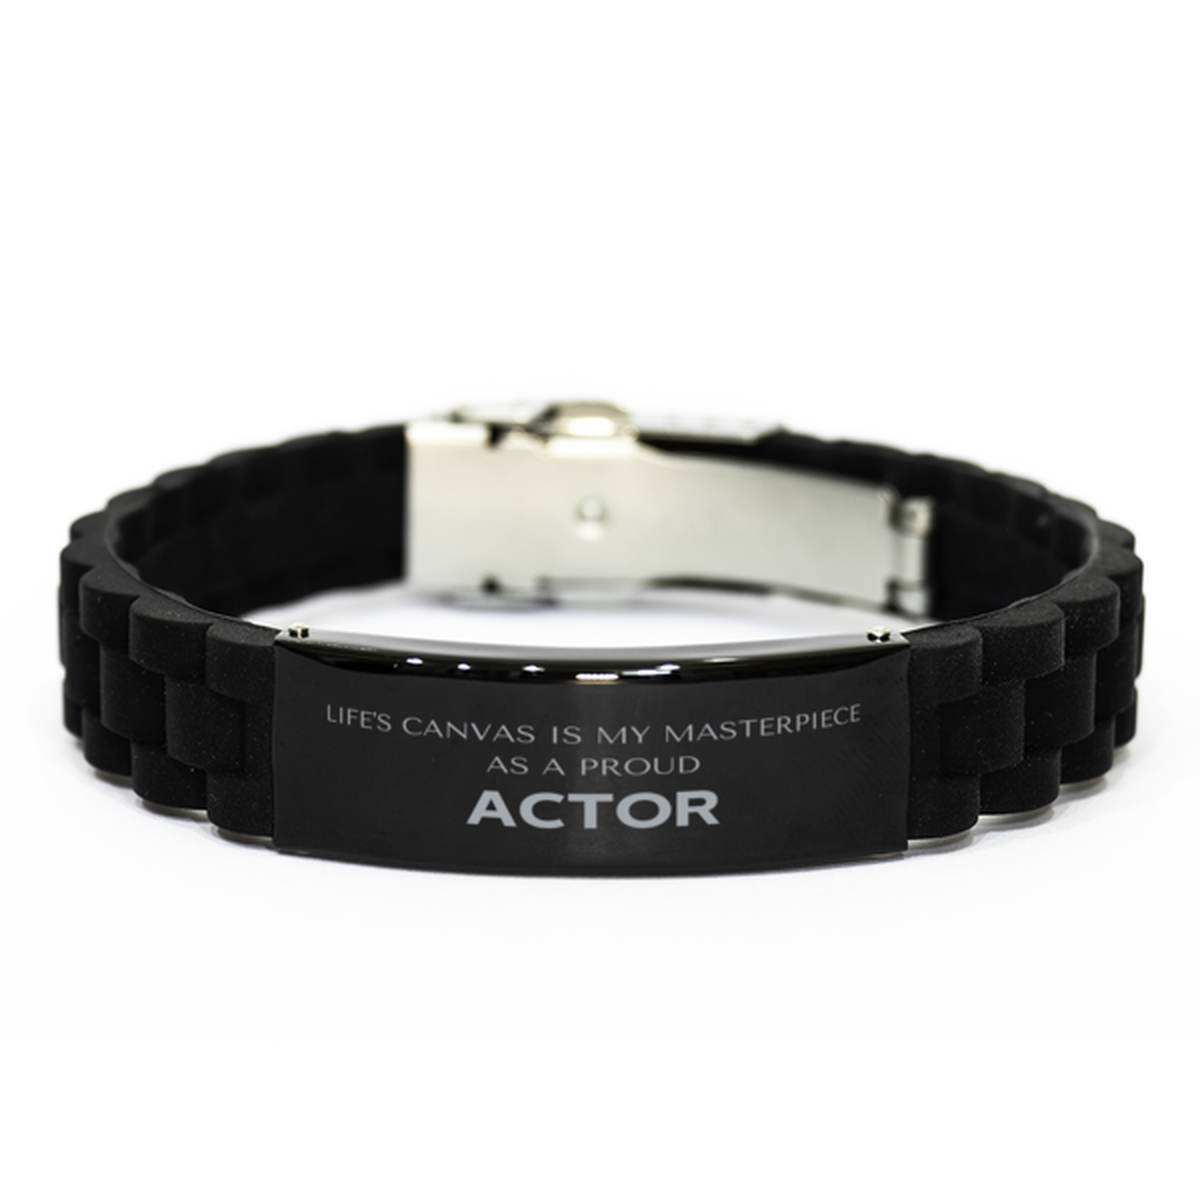 Proud Actor Gifts, Life's canvas is my masterpiece, Epic Birthday Christmas Unique Black Glidelock Clasp Bracelet For Actor, Coworkers, Men, Women, Friends